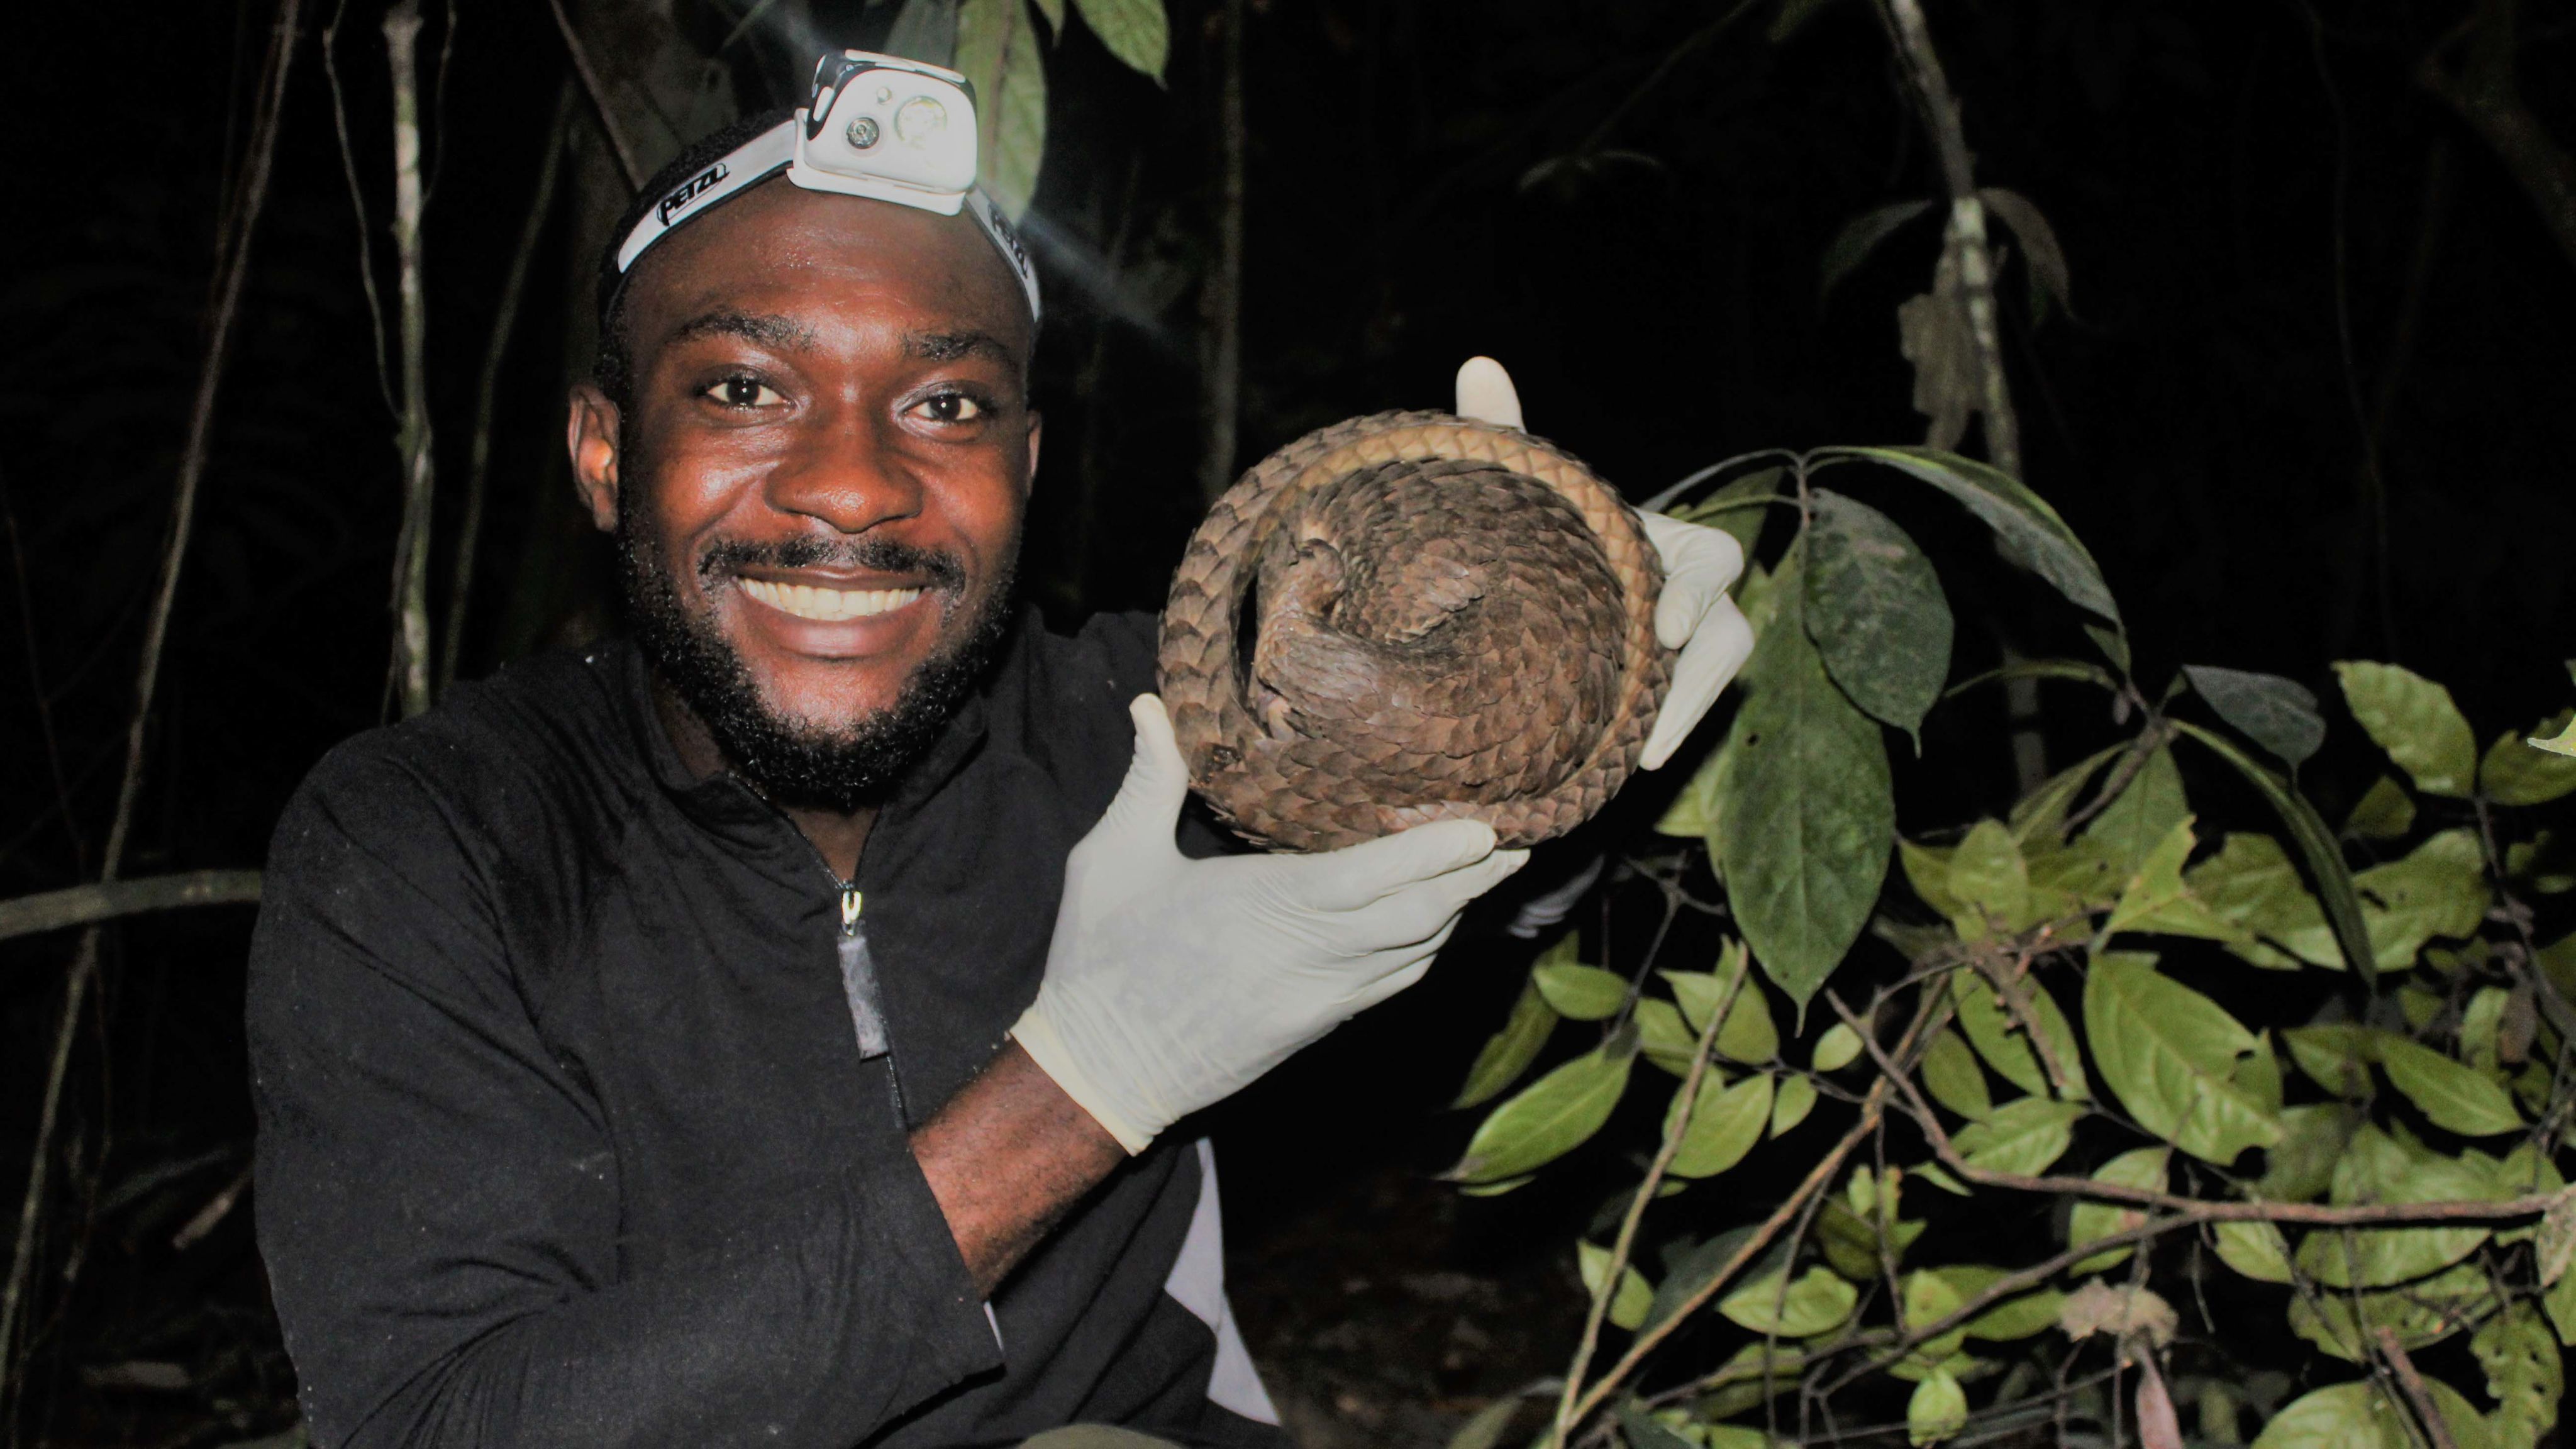 Charles holding a curled up pangolin that he tagged for his ecological work in Nigeria.